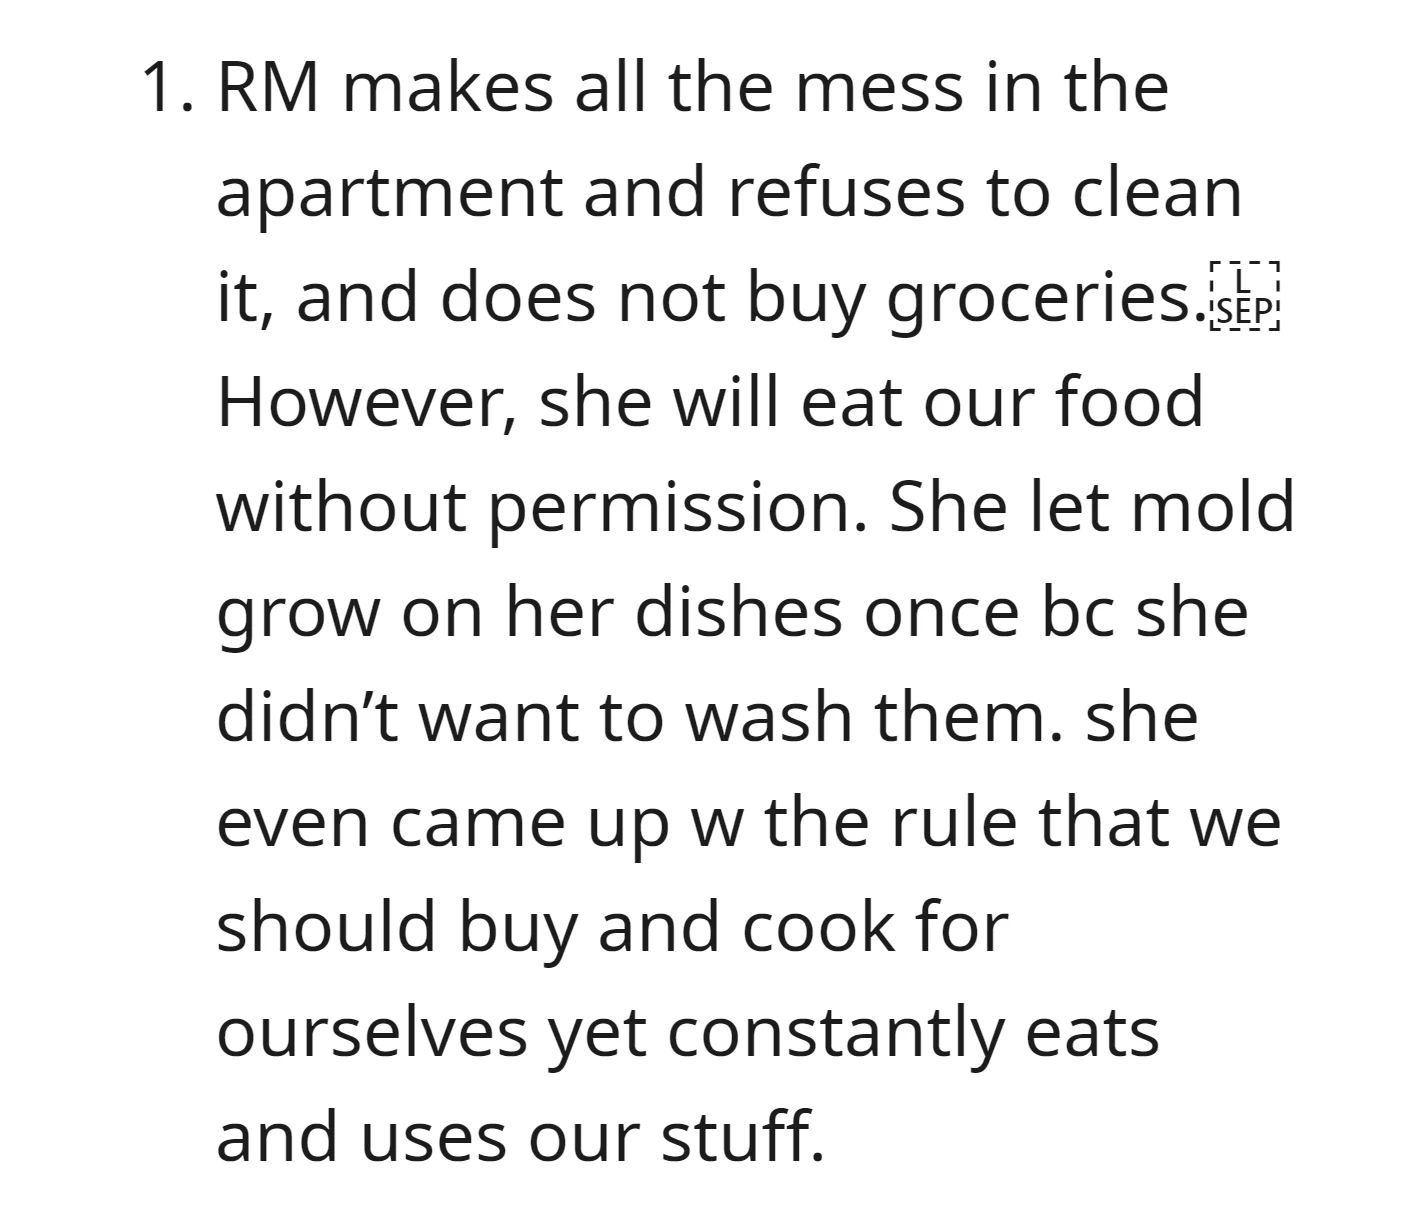 OP's roommate refuses to clean, neglects groceries, eats the OP's food without permission